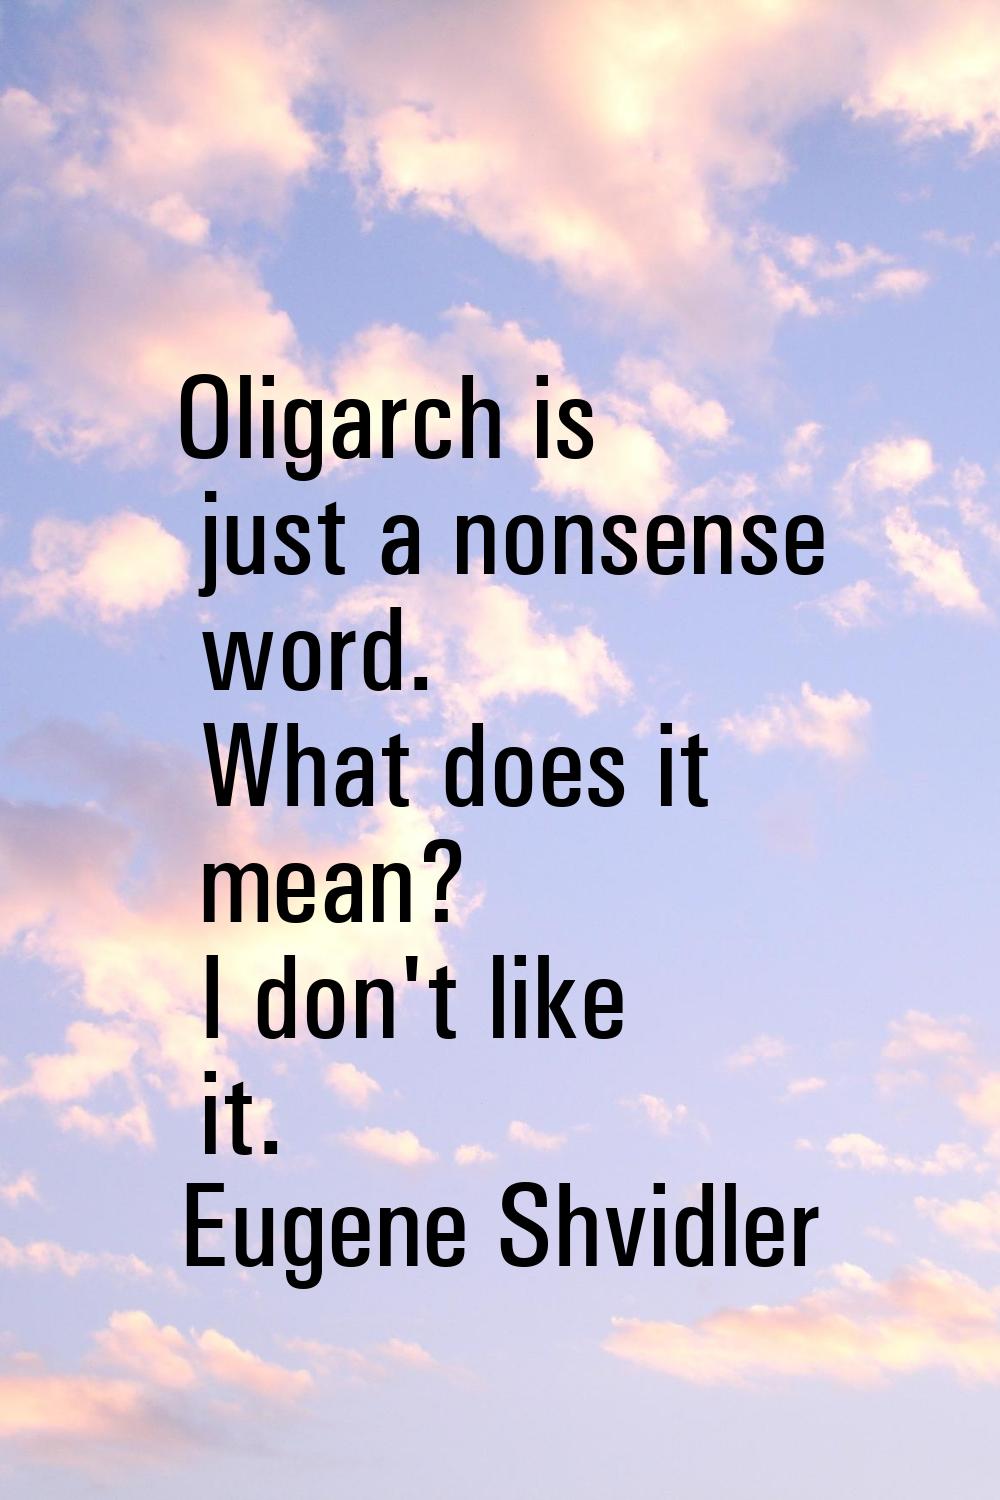 Oligarch is just a nonsense word. What does it mean? I don't like it.